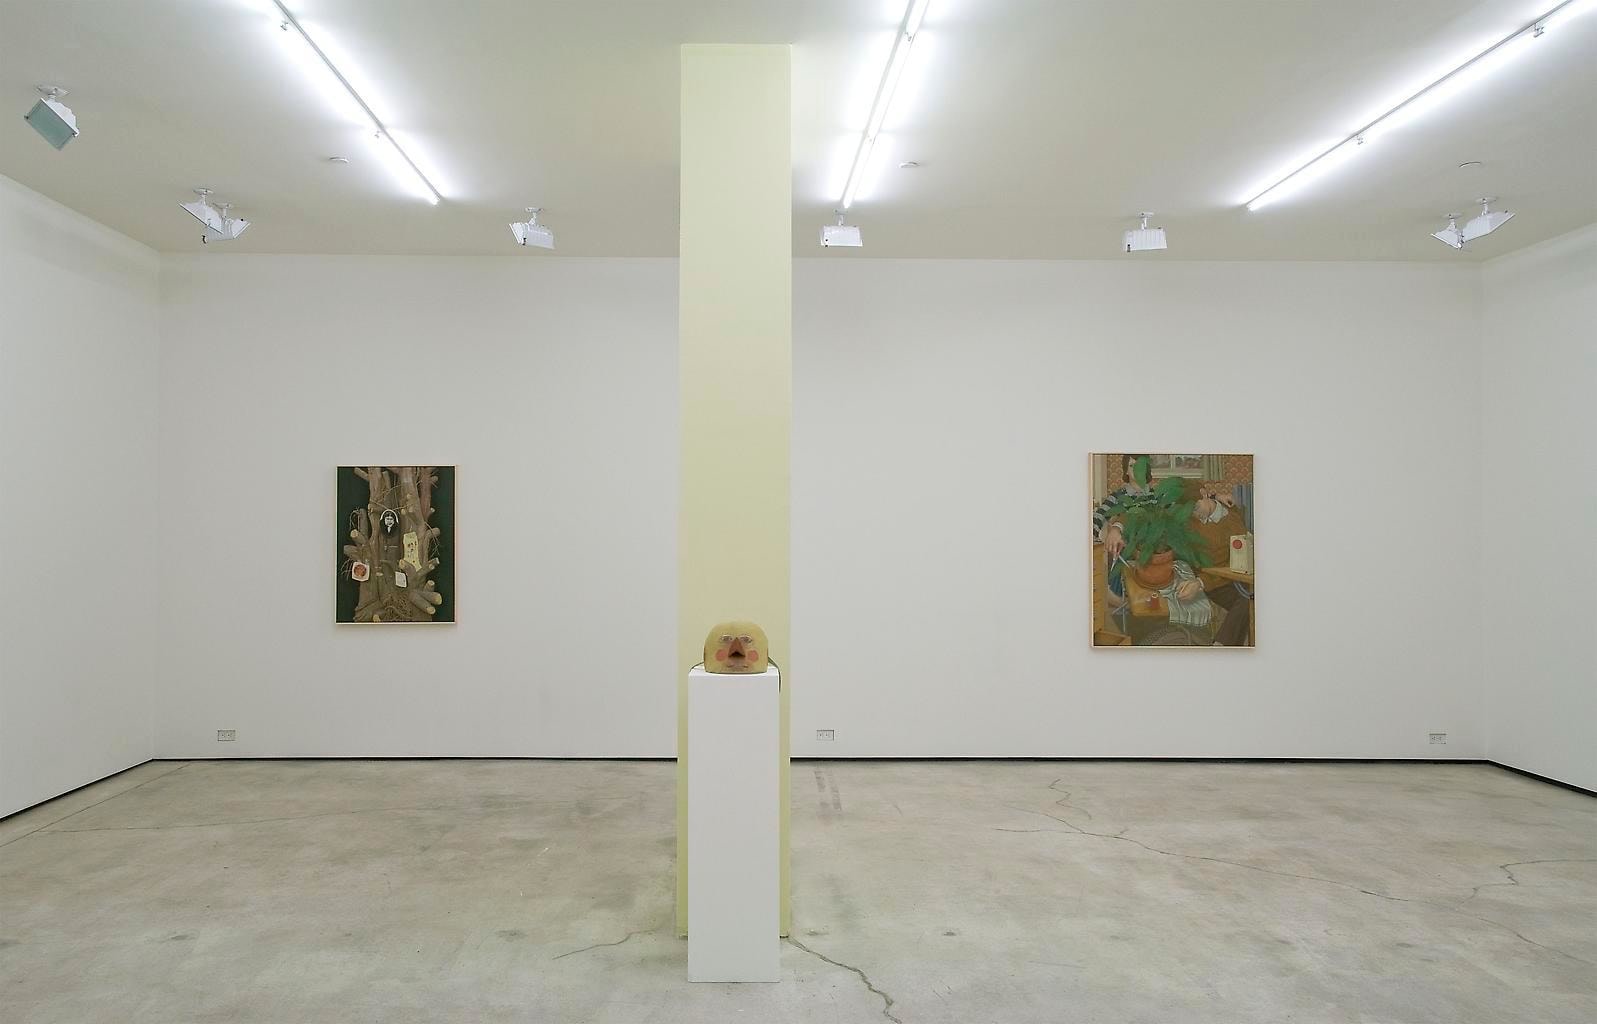  Installation view, Michael Cline, Arcadia, Marc Jancou, New York, March 18 - April 23, 2011